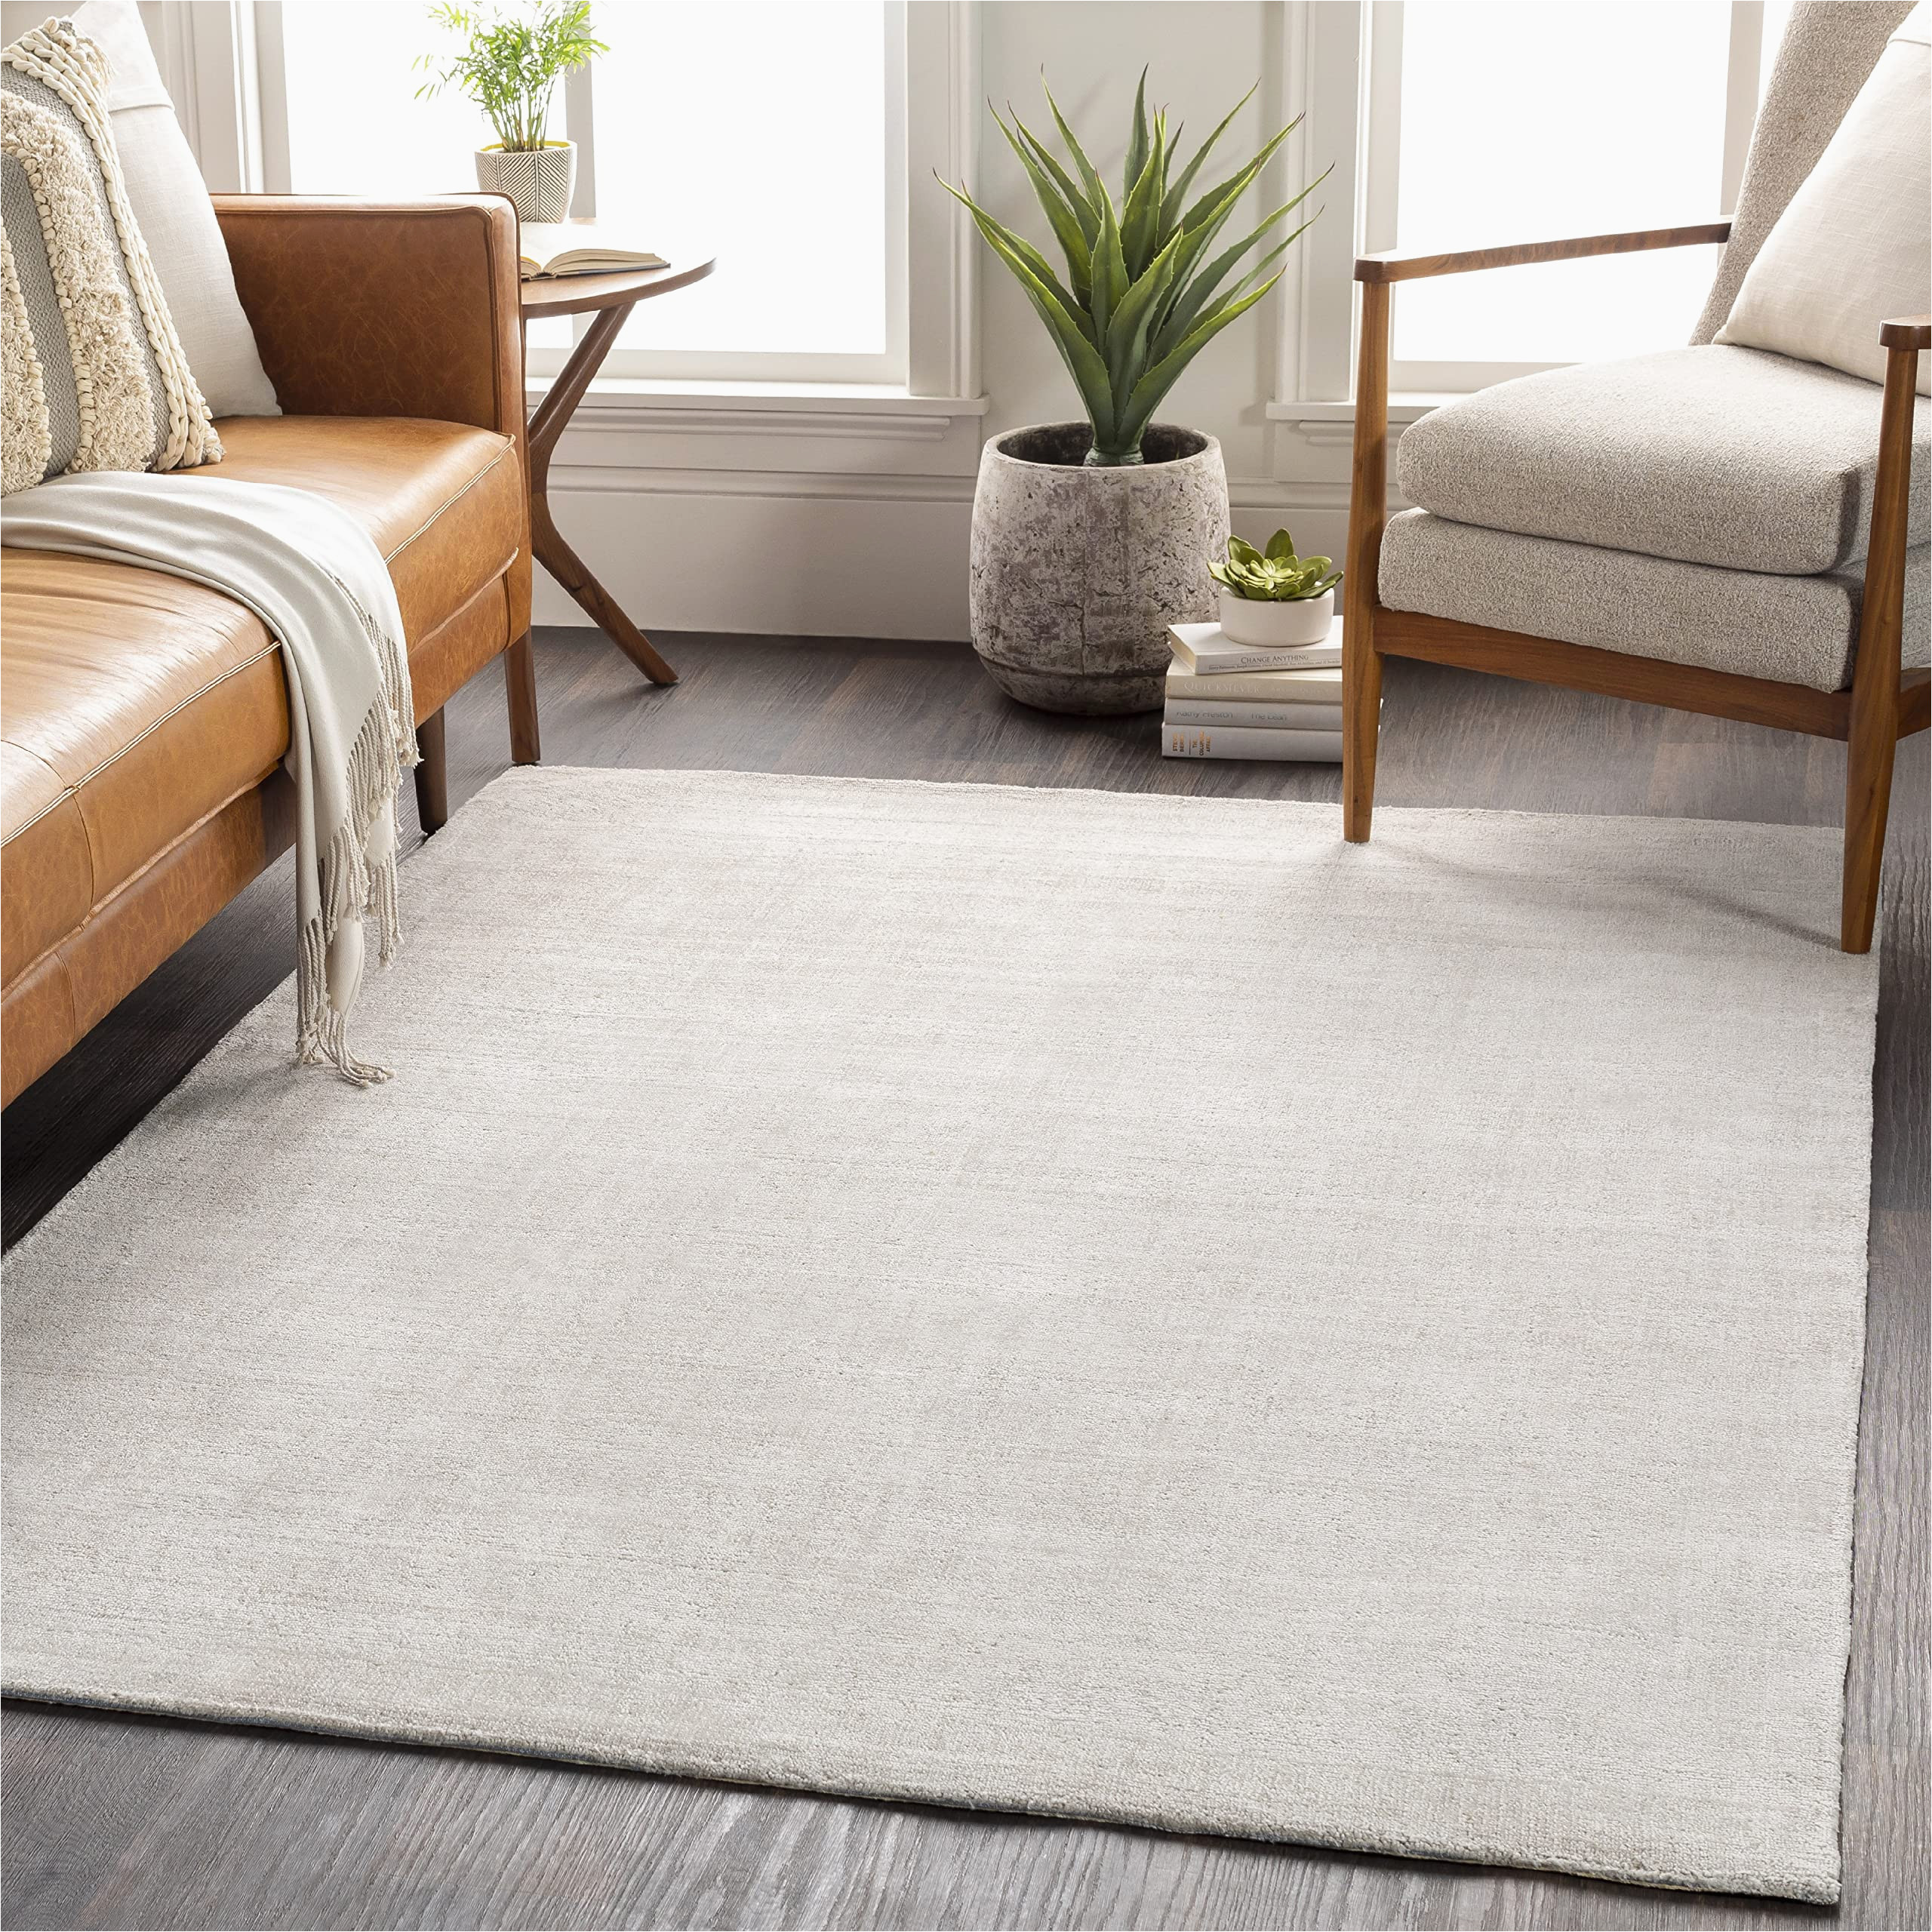 8×10 solid Gray area Rug Mark&day area Rugs, 8×10 Farnham solid and Border Light Gray area Rug Light Carpet for Living Room, Bedroom or Kitchen (8′ X 10′)